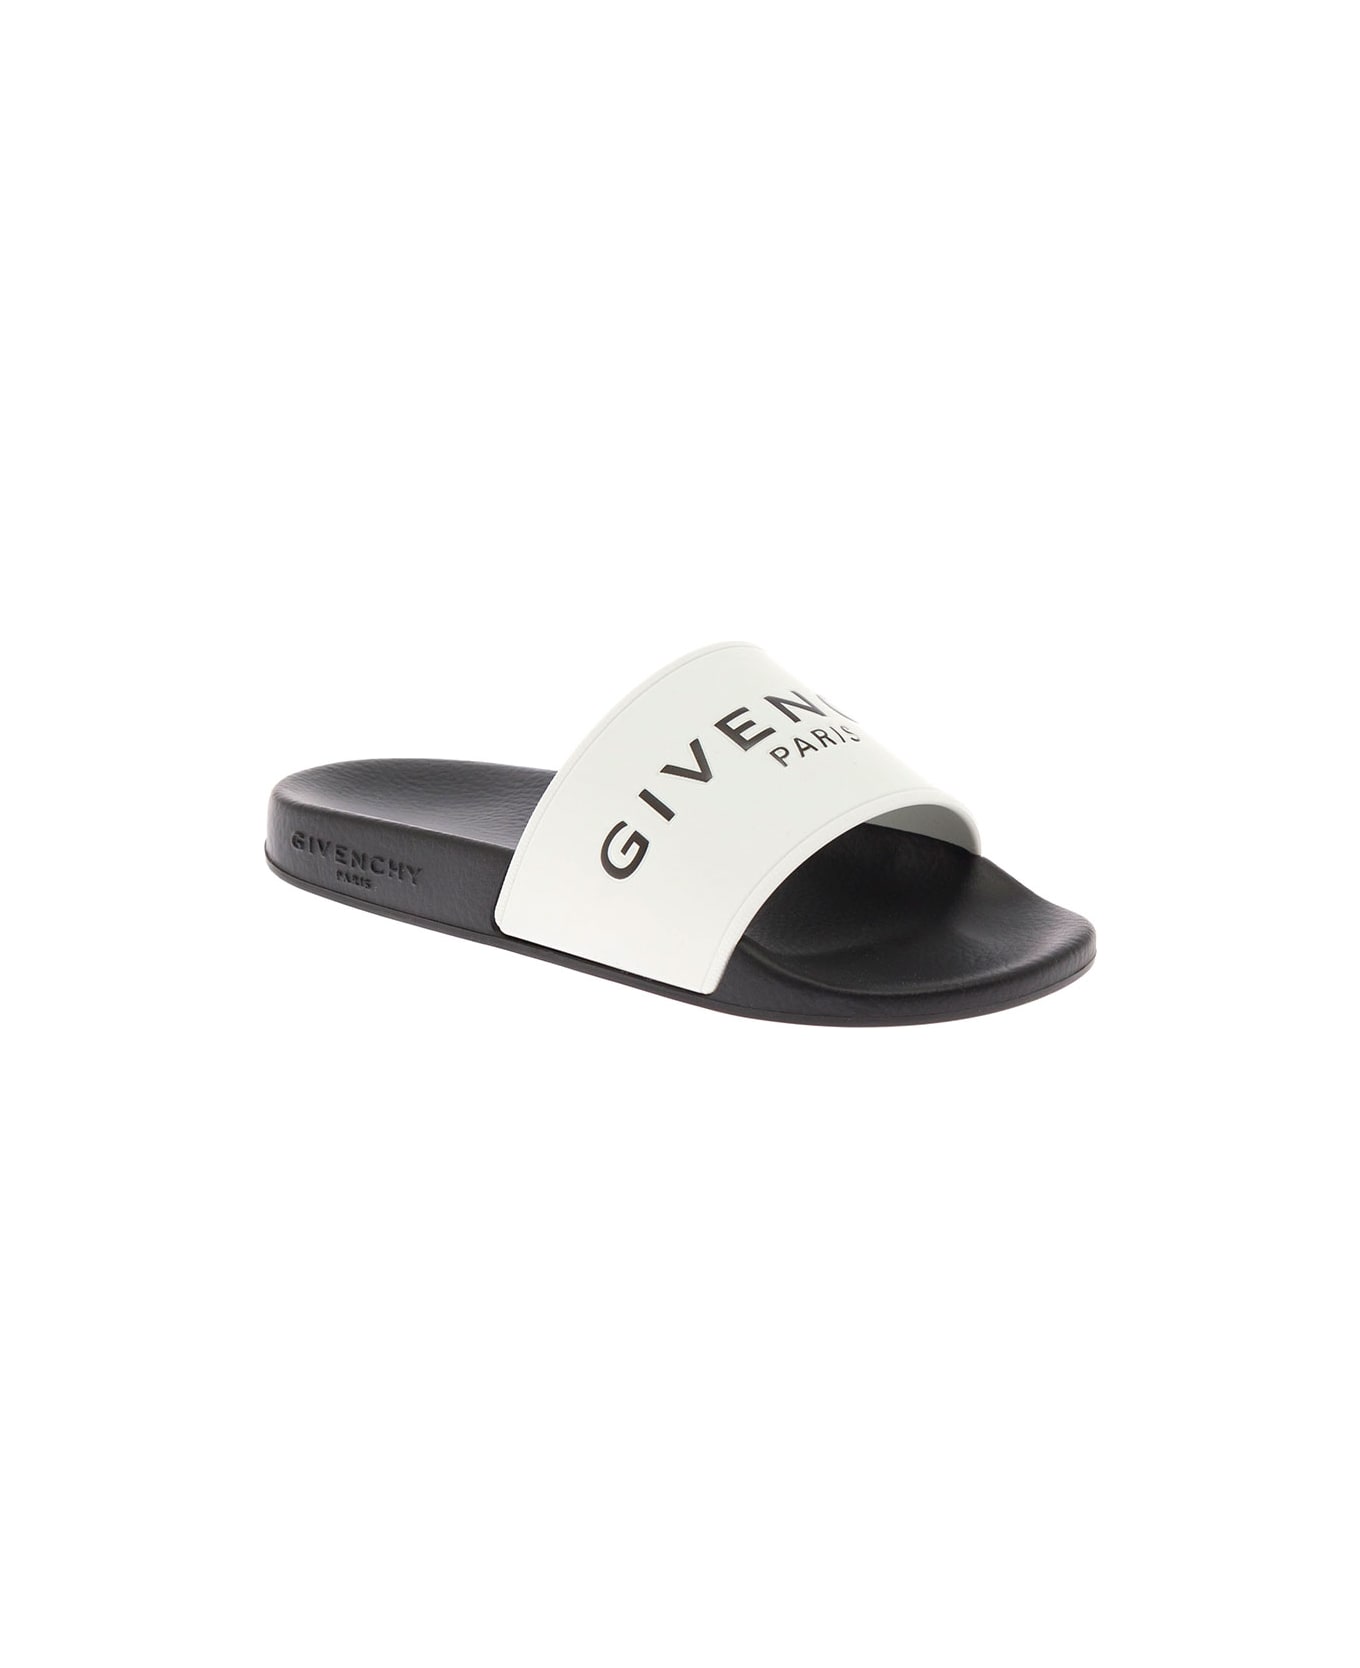 Givenchy Gvenchy Kids Boy's Black And White Slide Rubber Sandals With Logo - White